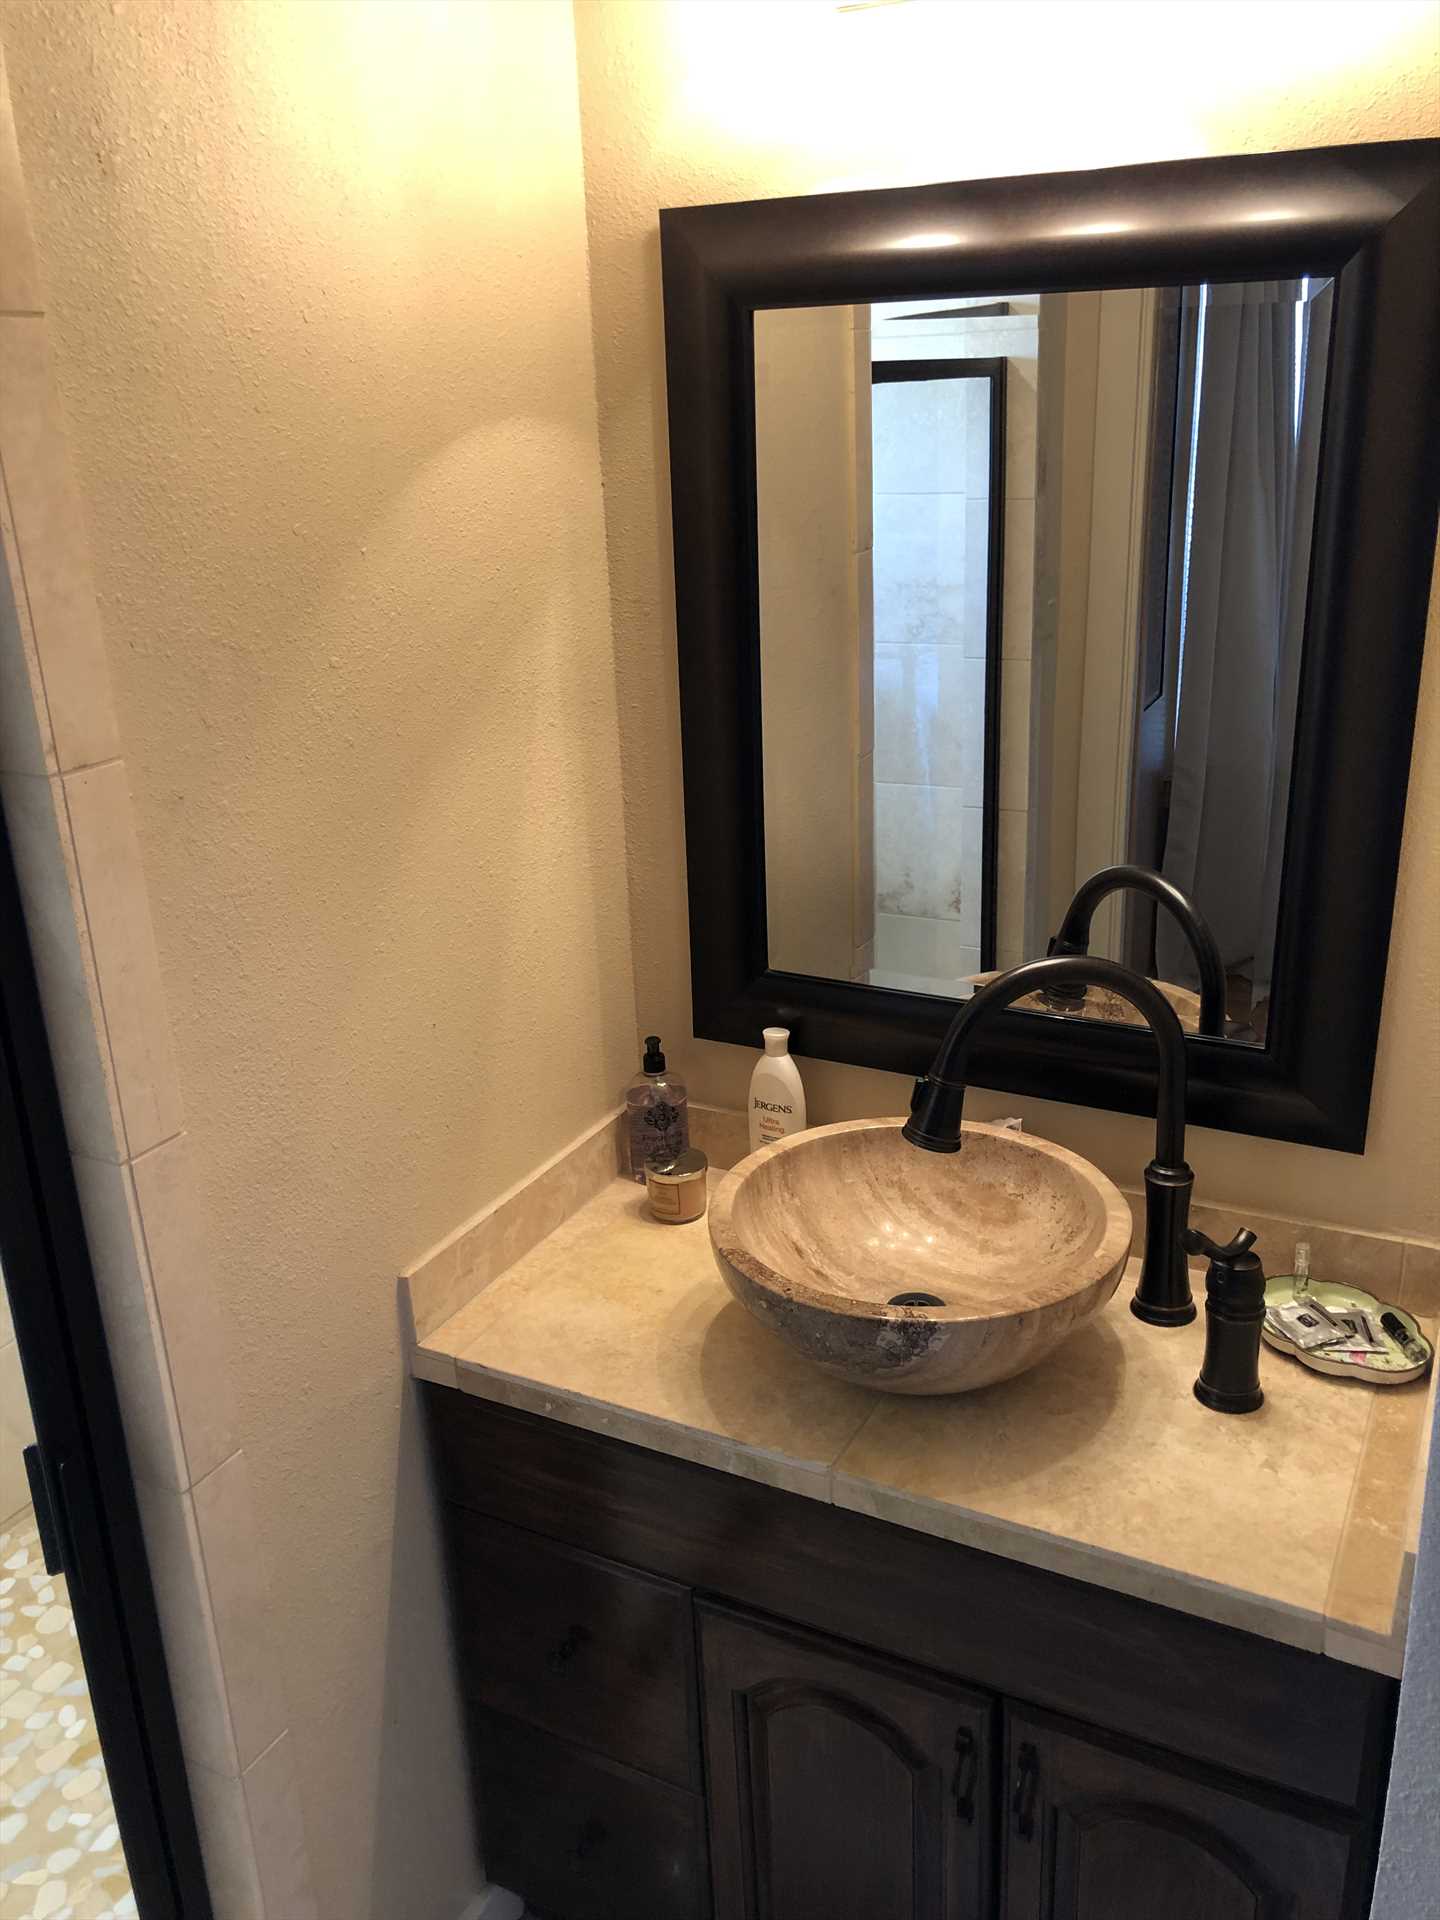                                                 The boldly-framed vanity mirror over the bowl-style sink add style touches to the master bath, there's nothing ordinary about any room here!